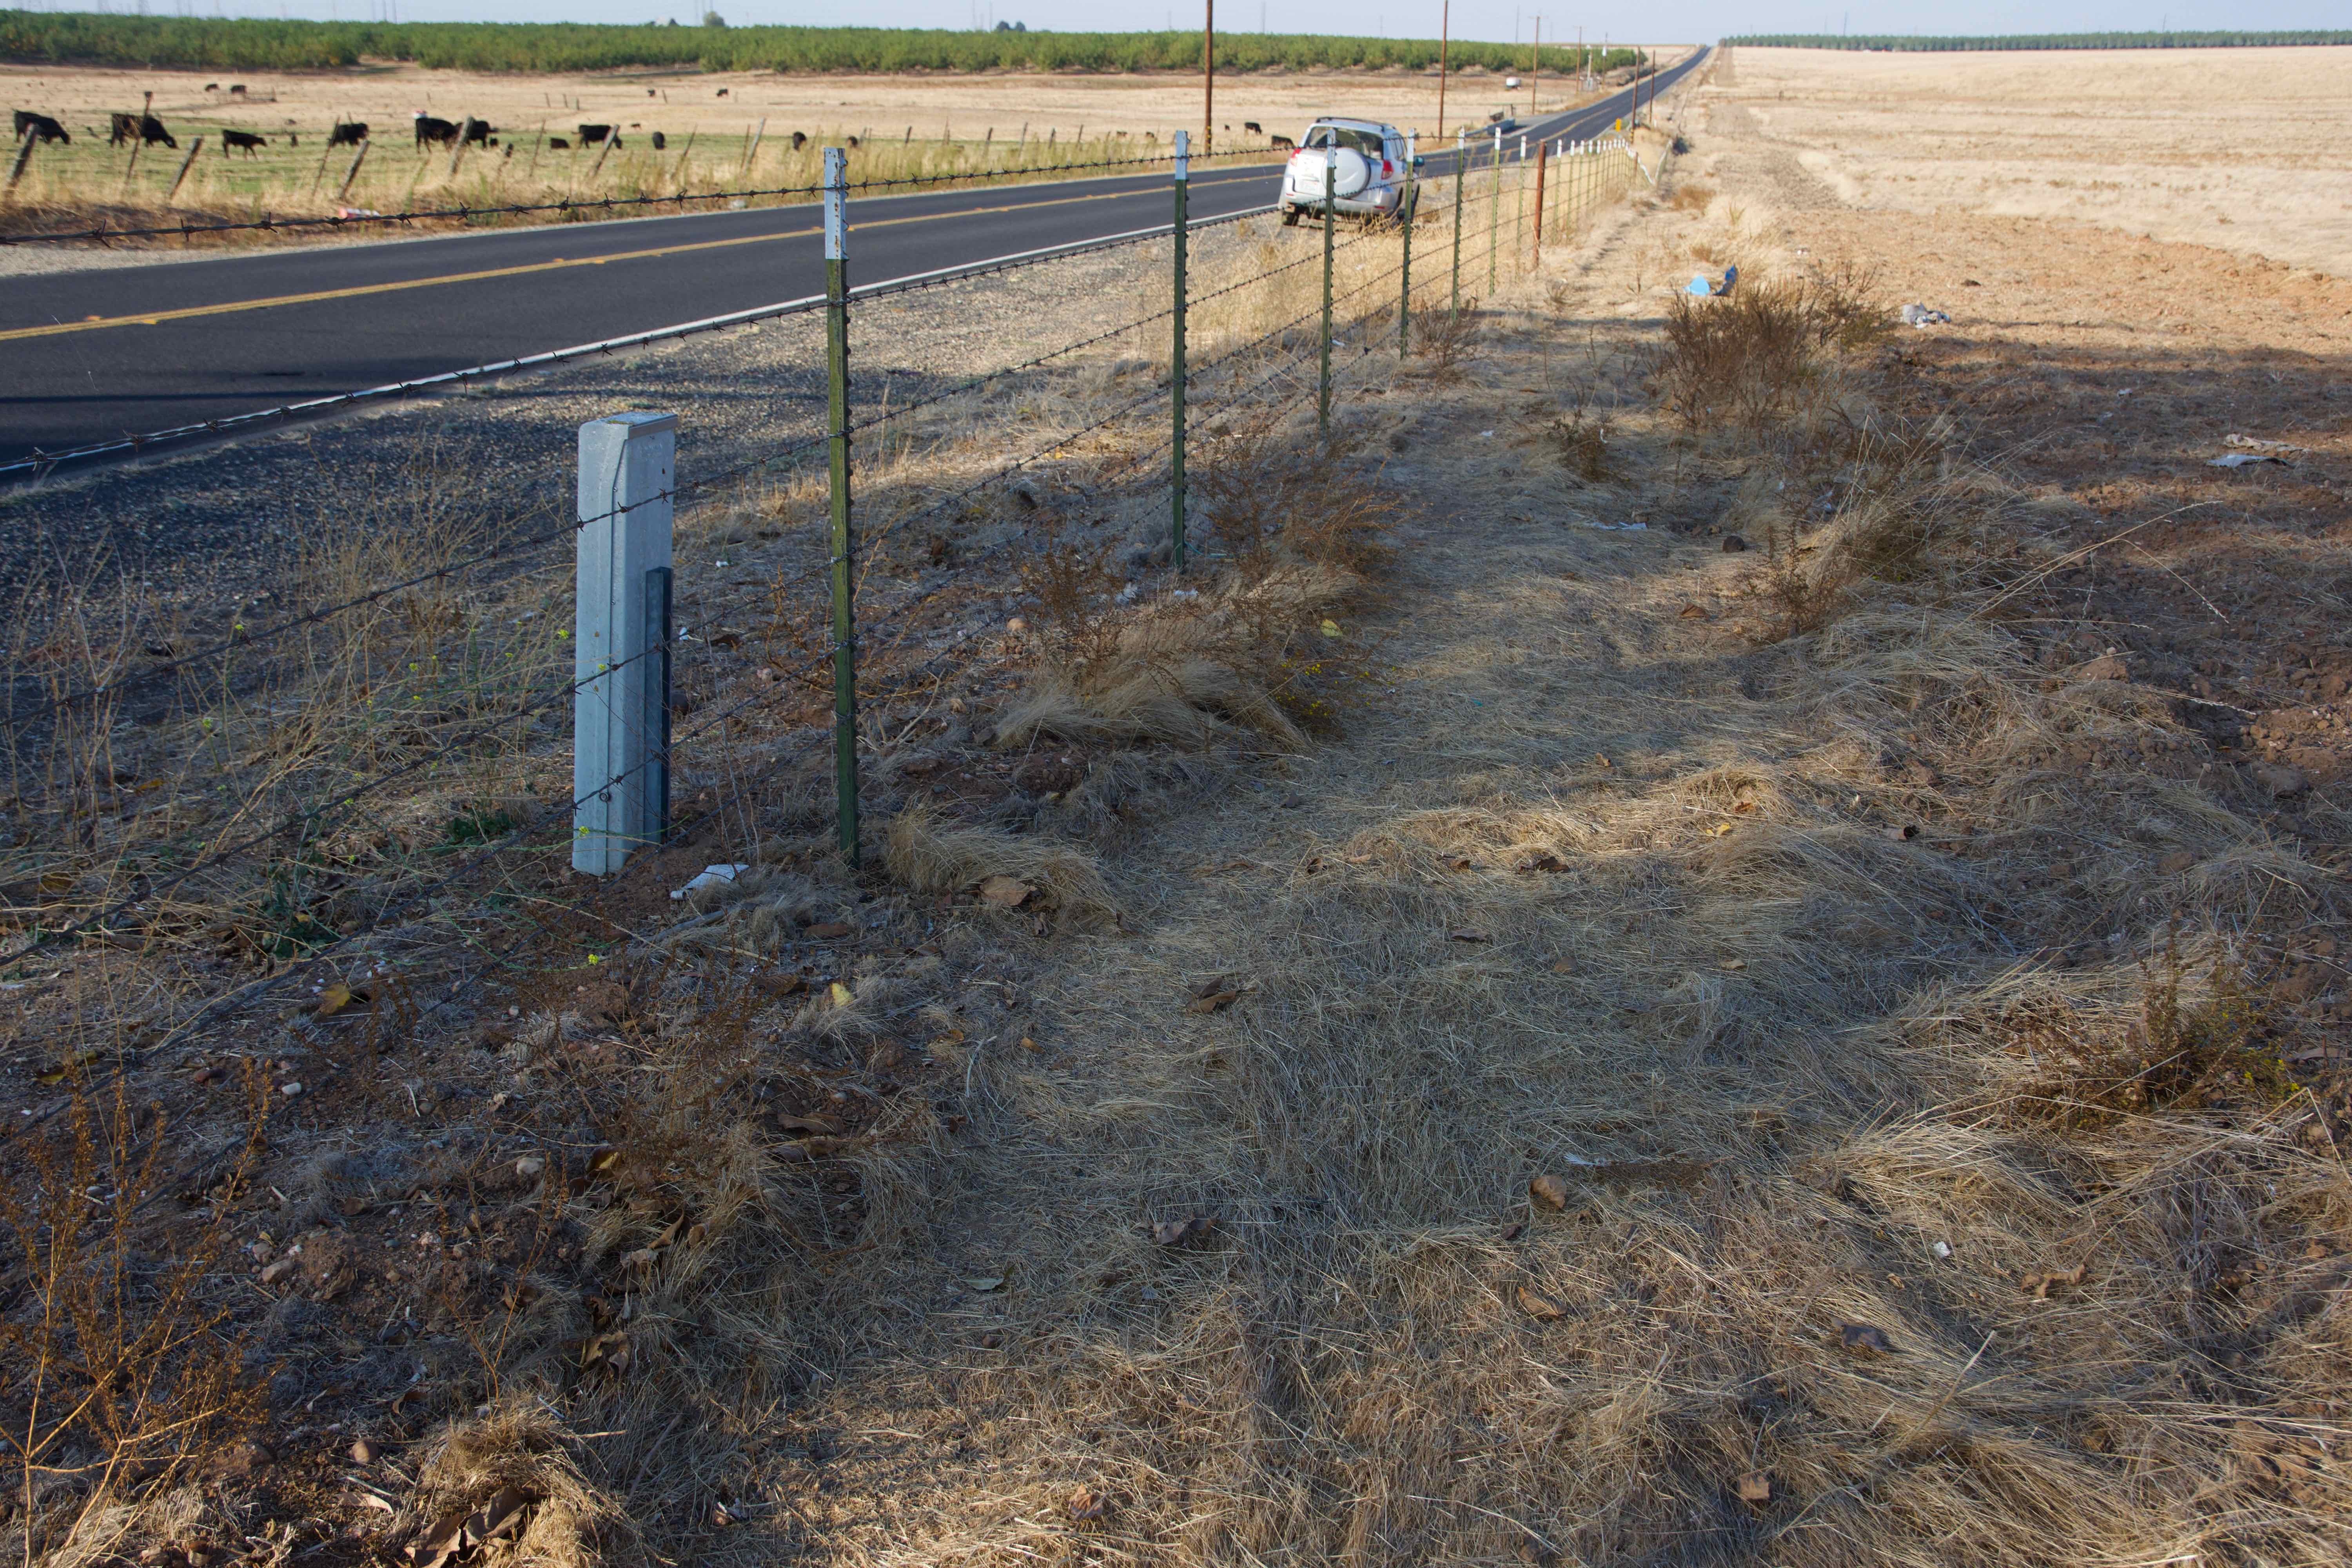 The confluence point lies just inside this farm fence, next to the Escalon-Bellota Road